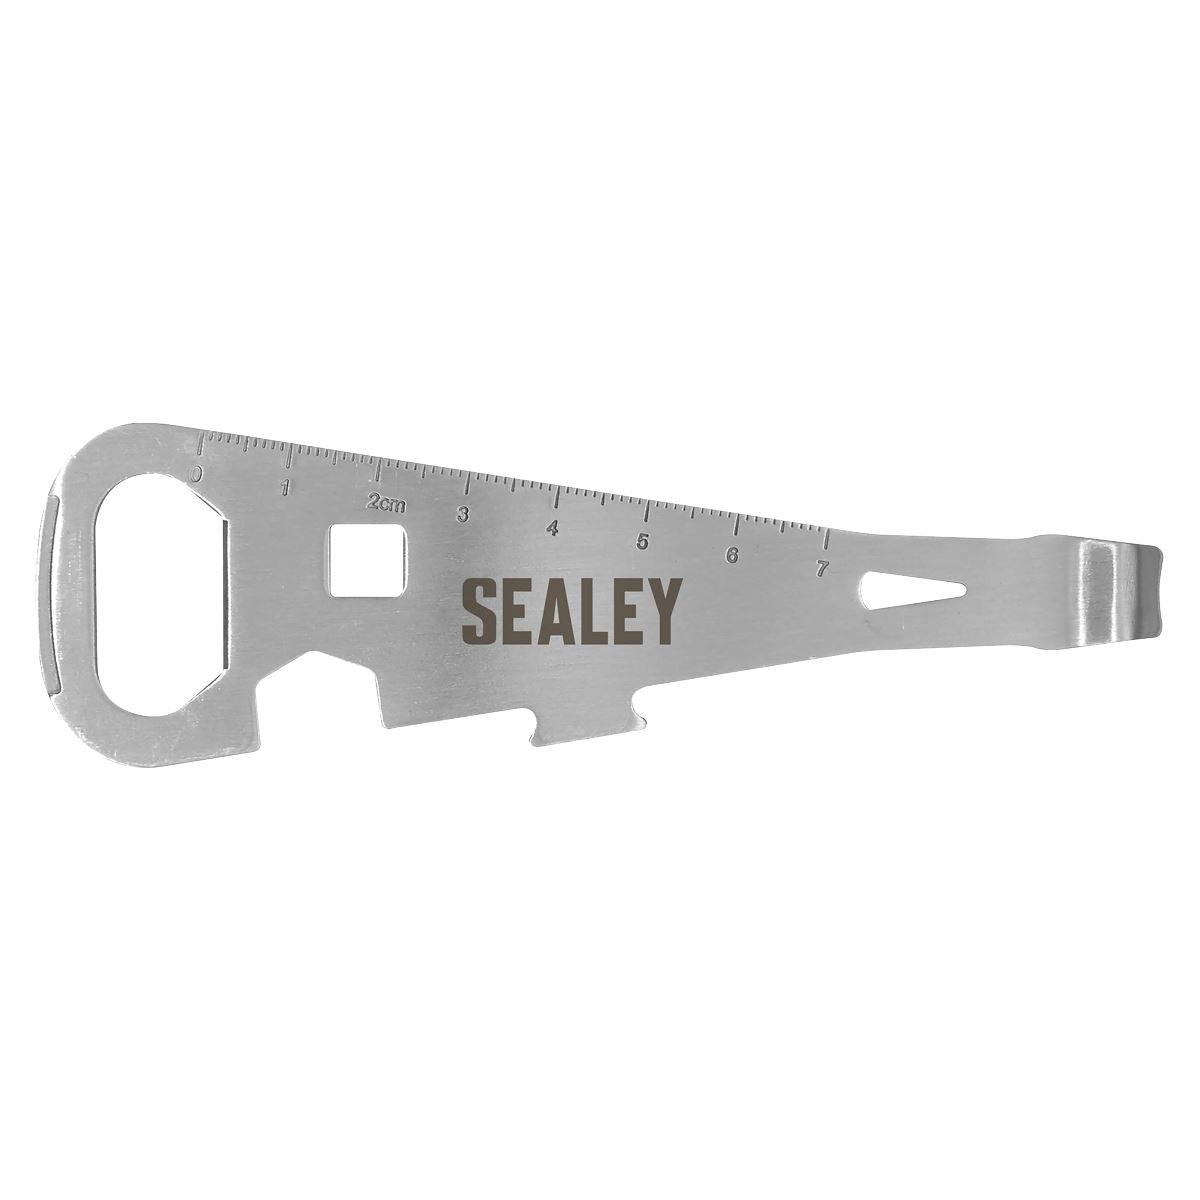 Sealey Paint Can Opener Multi-Tool 7-in-1